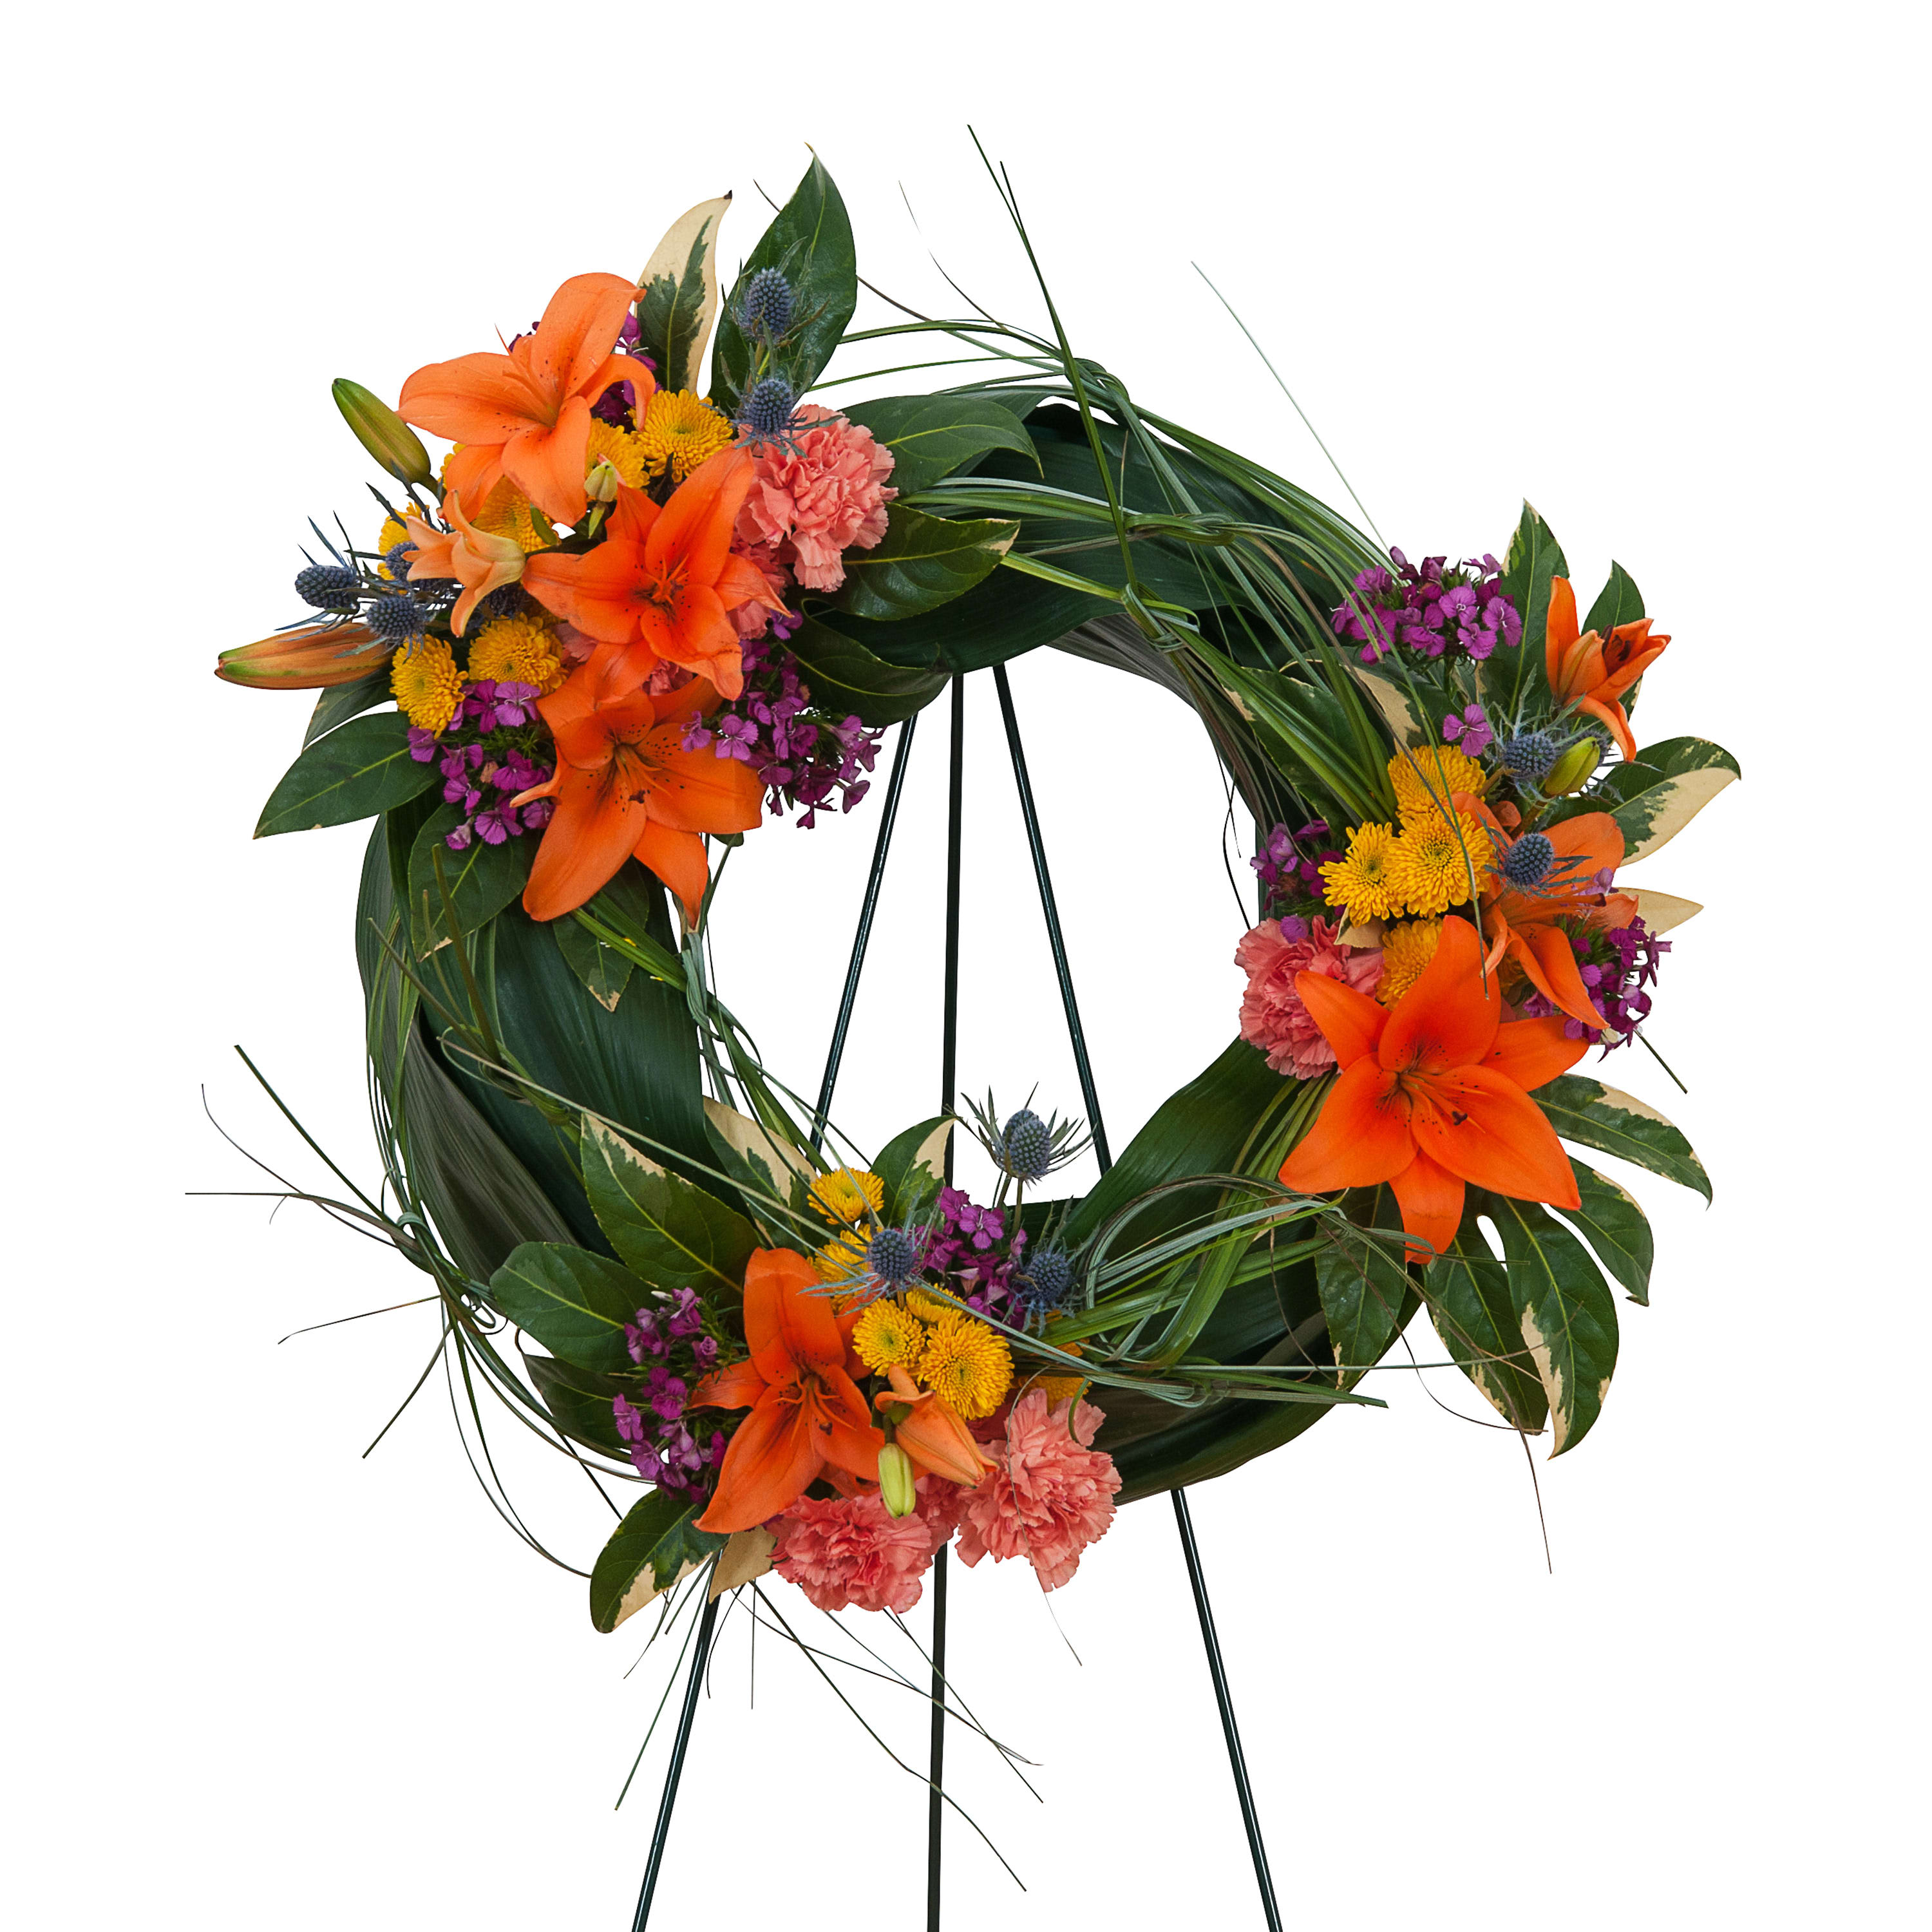 Remembering the Simple Good Times - Lilies and a variety of bright color blooms add to the personalization of a wildflower look.